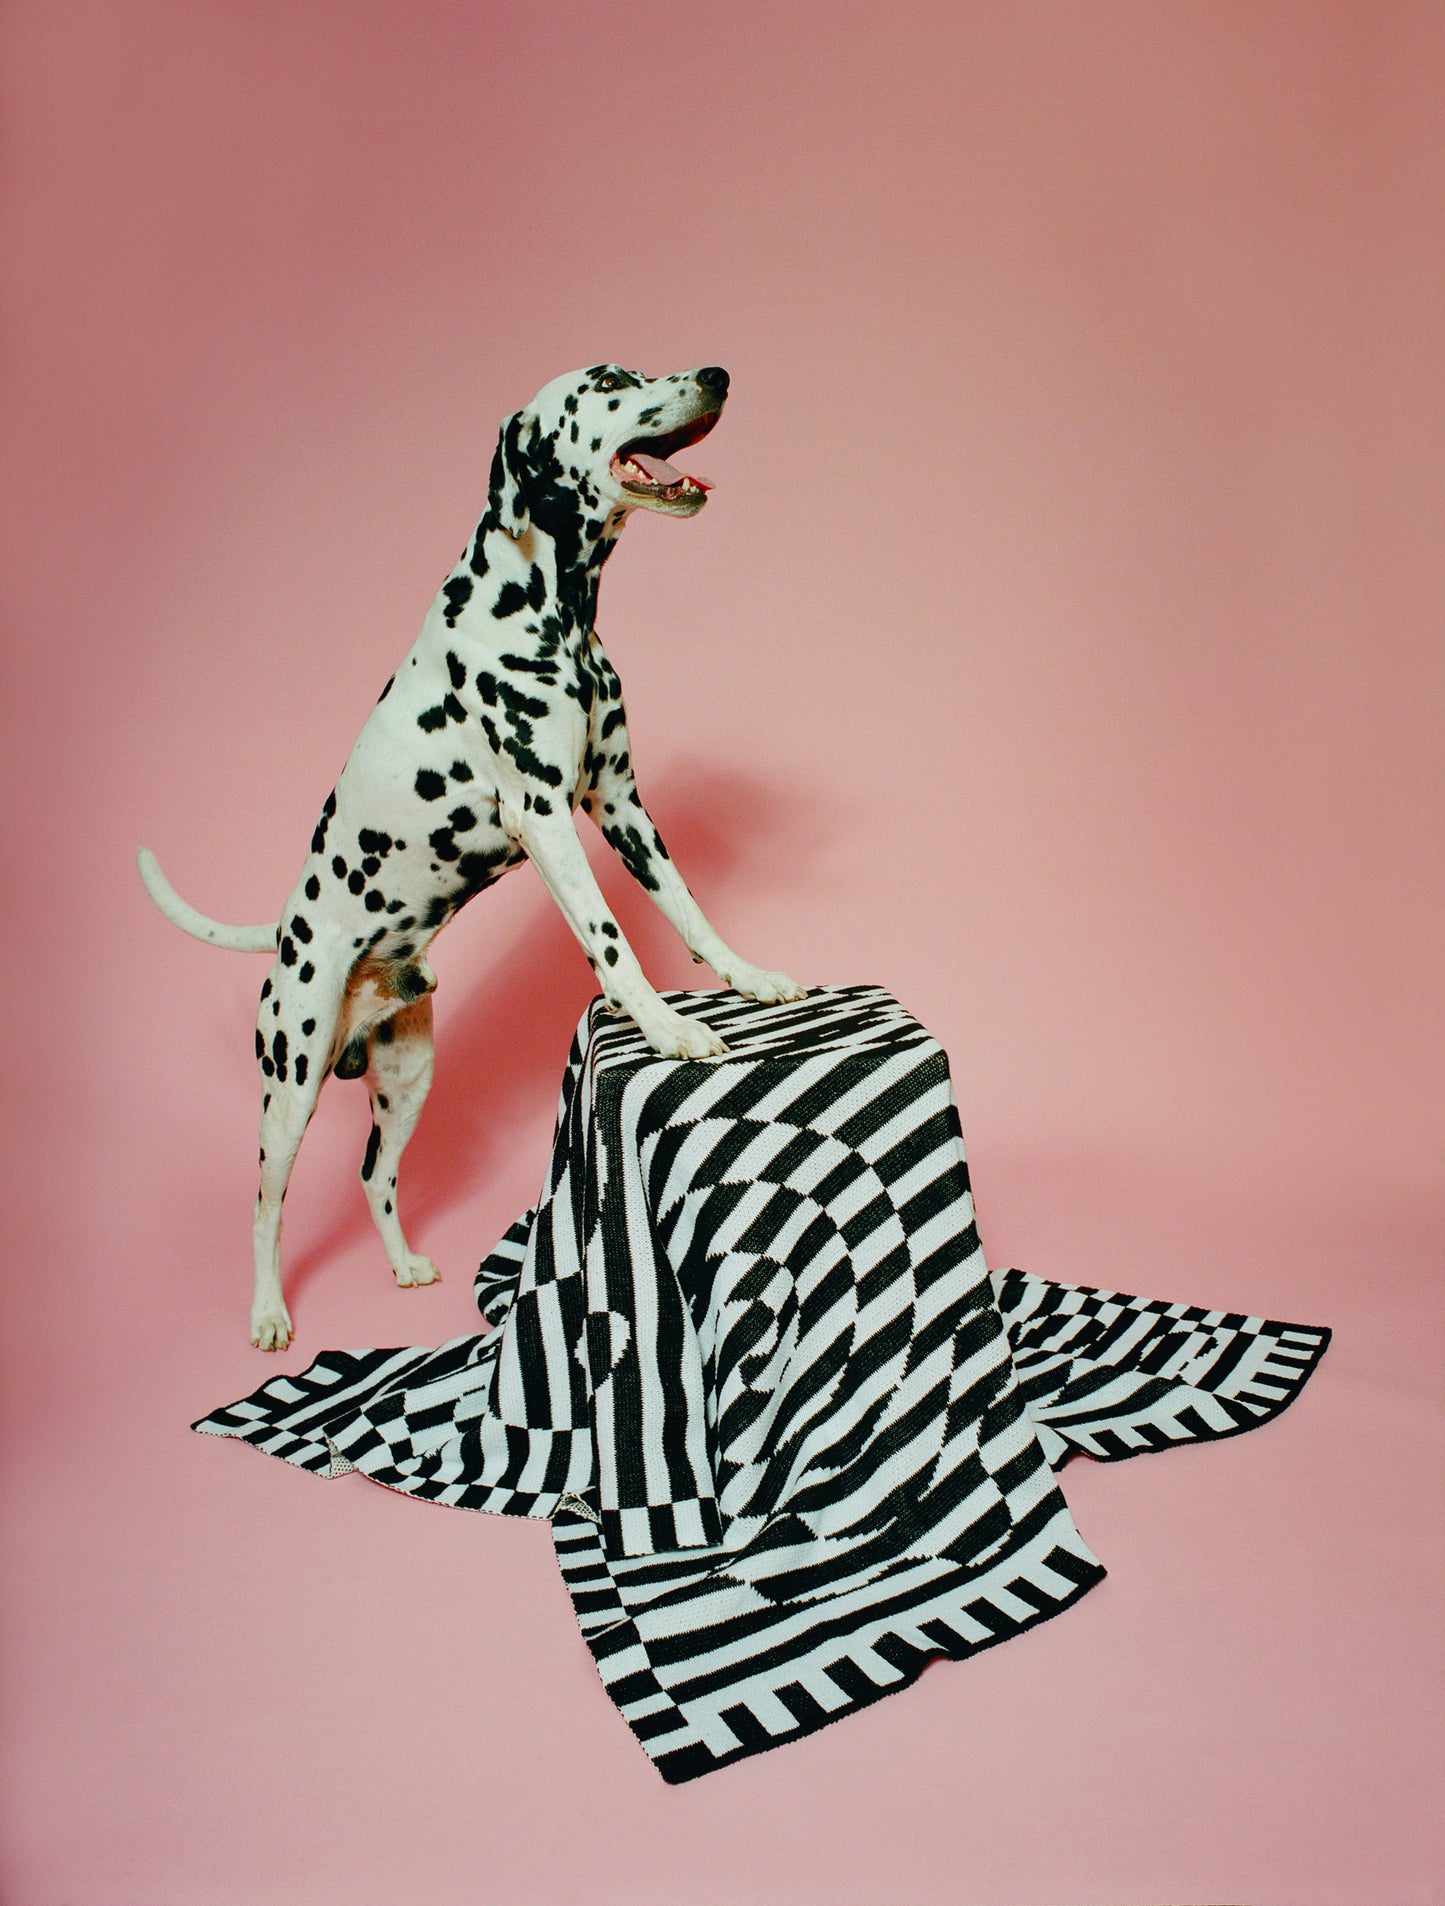 Image of the Dazzle Blanked draped on top of a stool with a Dalmation dog standing on top of it.